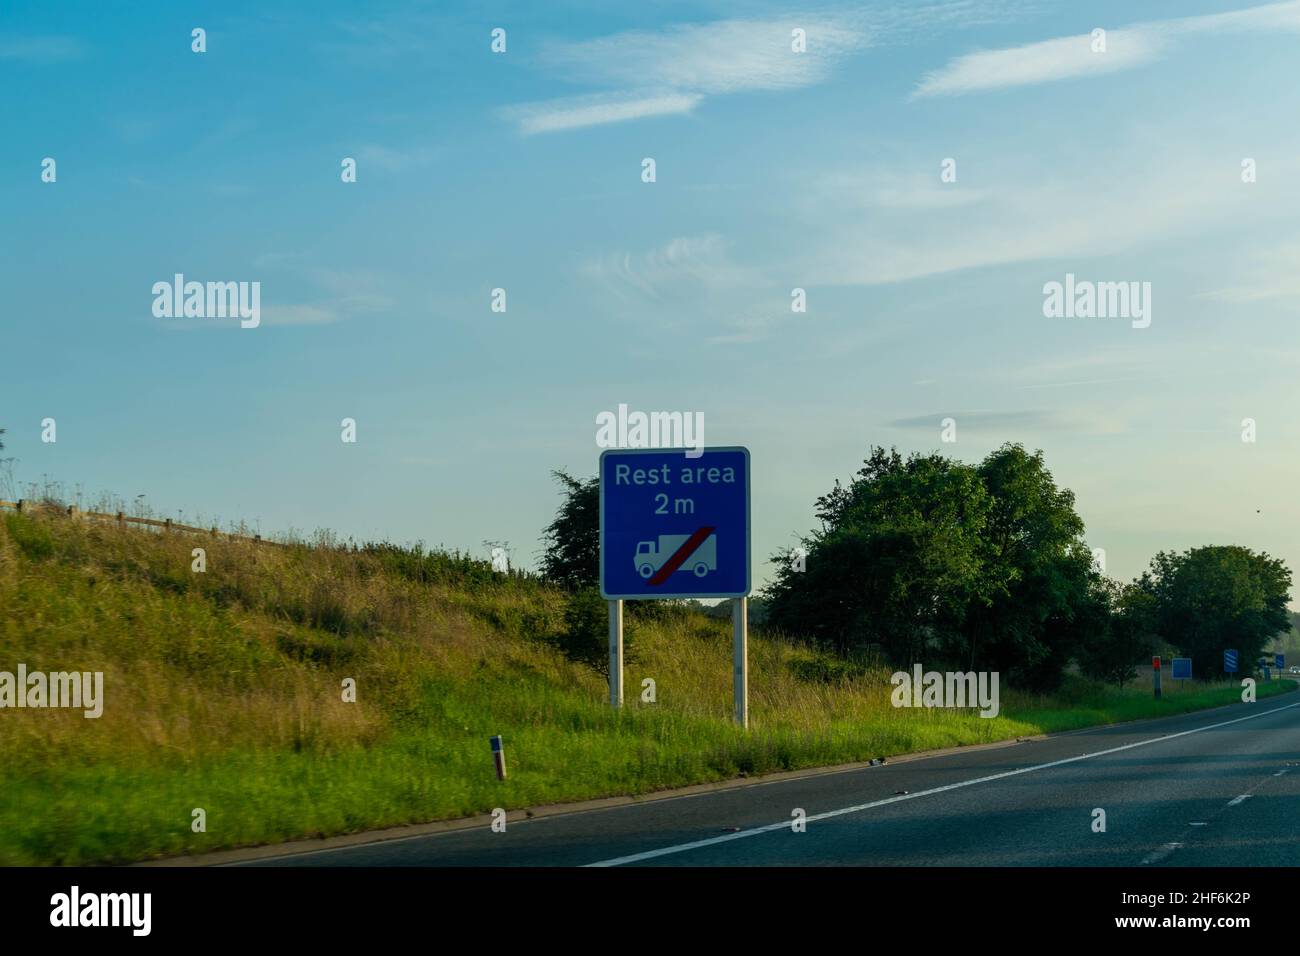 Bleu British motorway road sign advising drivers to pull over, stop and rest at the rest area to avoid tiredness whilst driving. Safety instruction Stock Photo